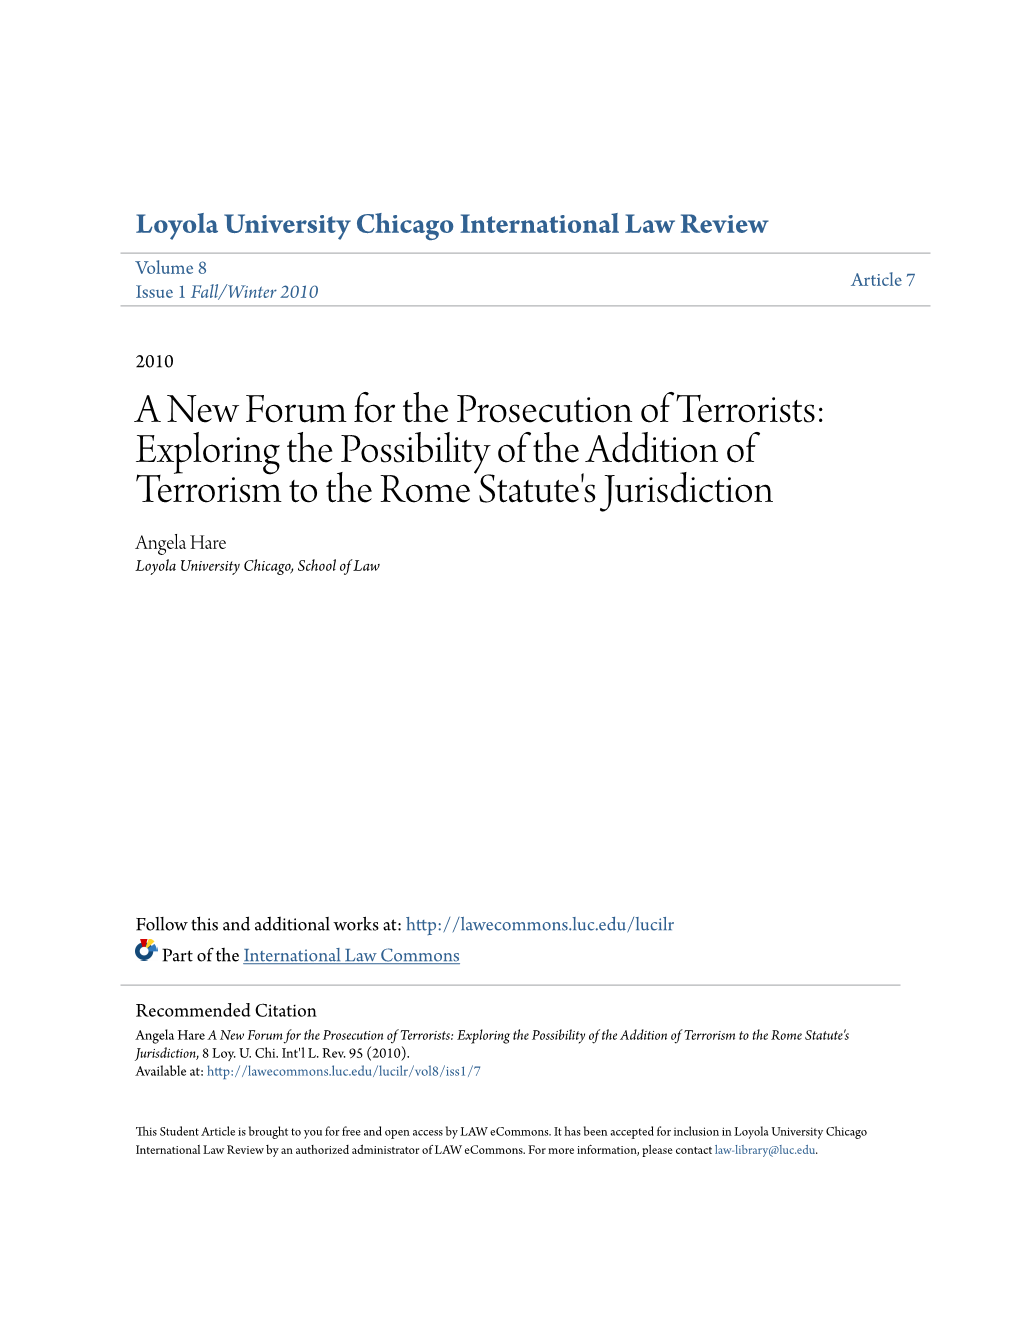 A New Forum for the Prosecution of Terrorists: Exploring the Possibility